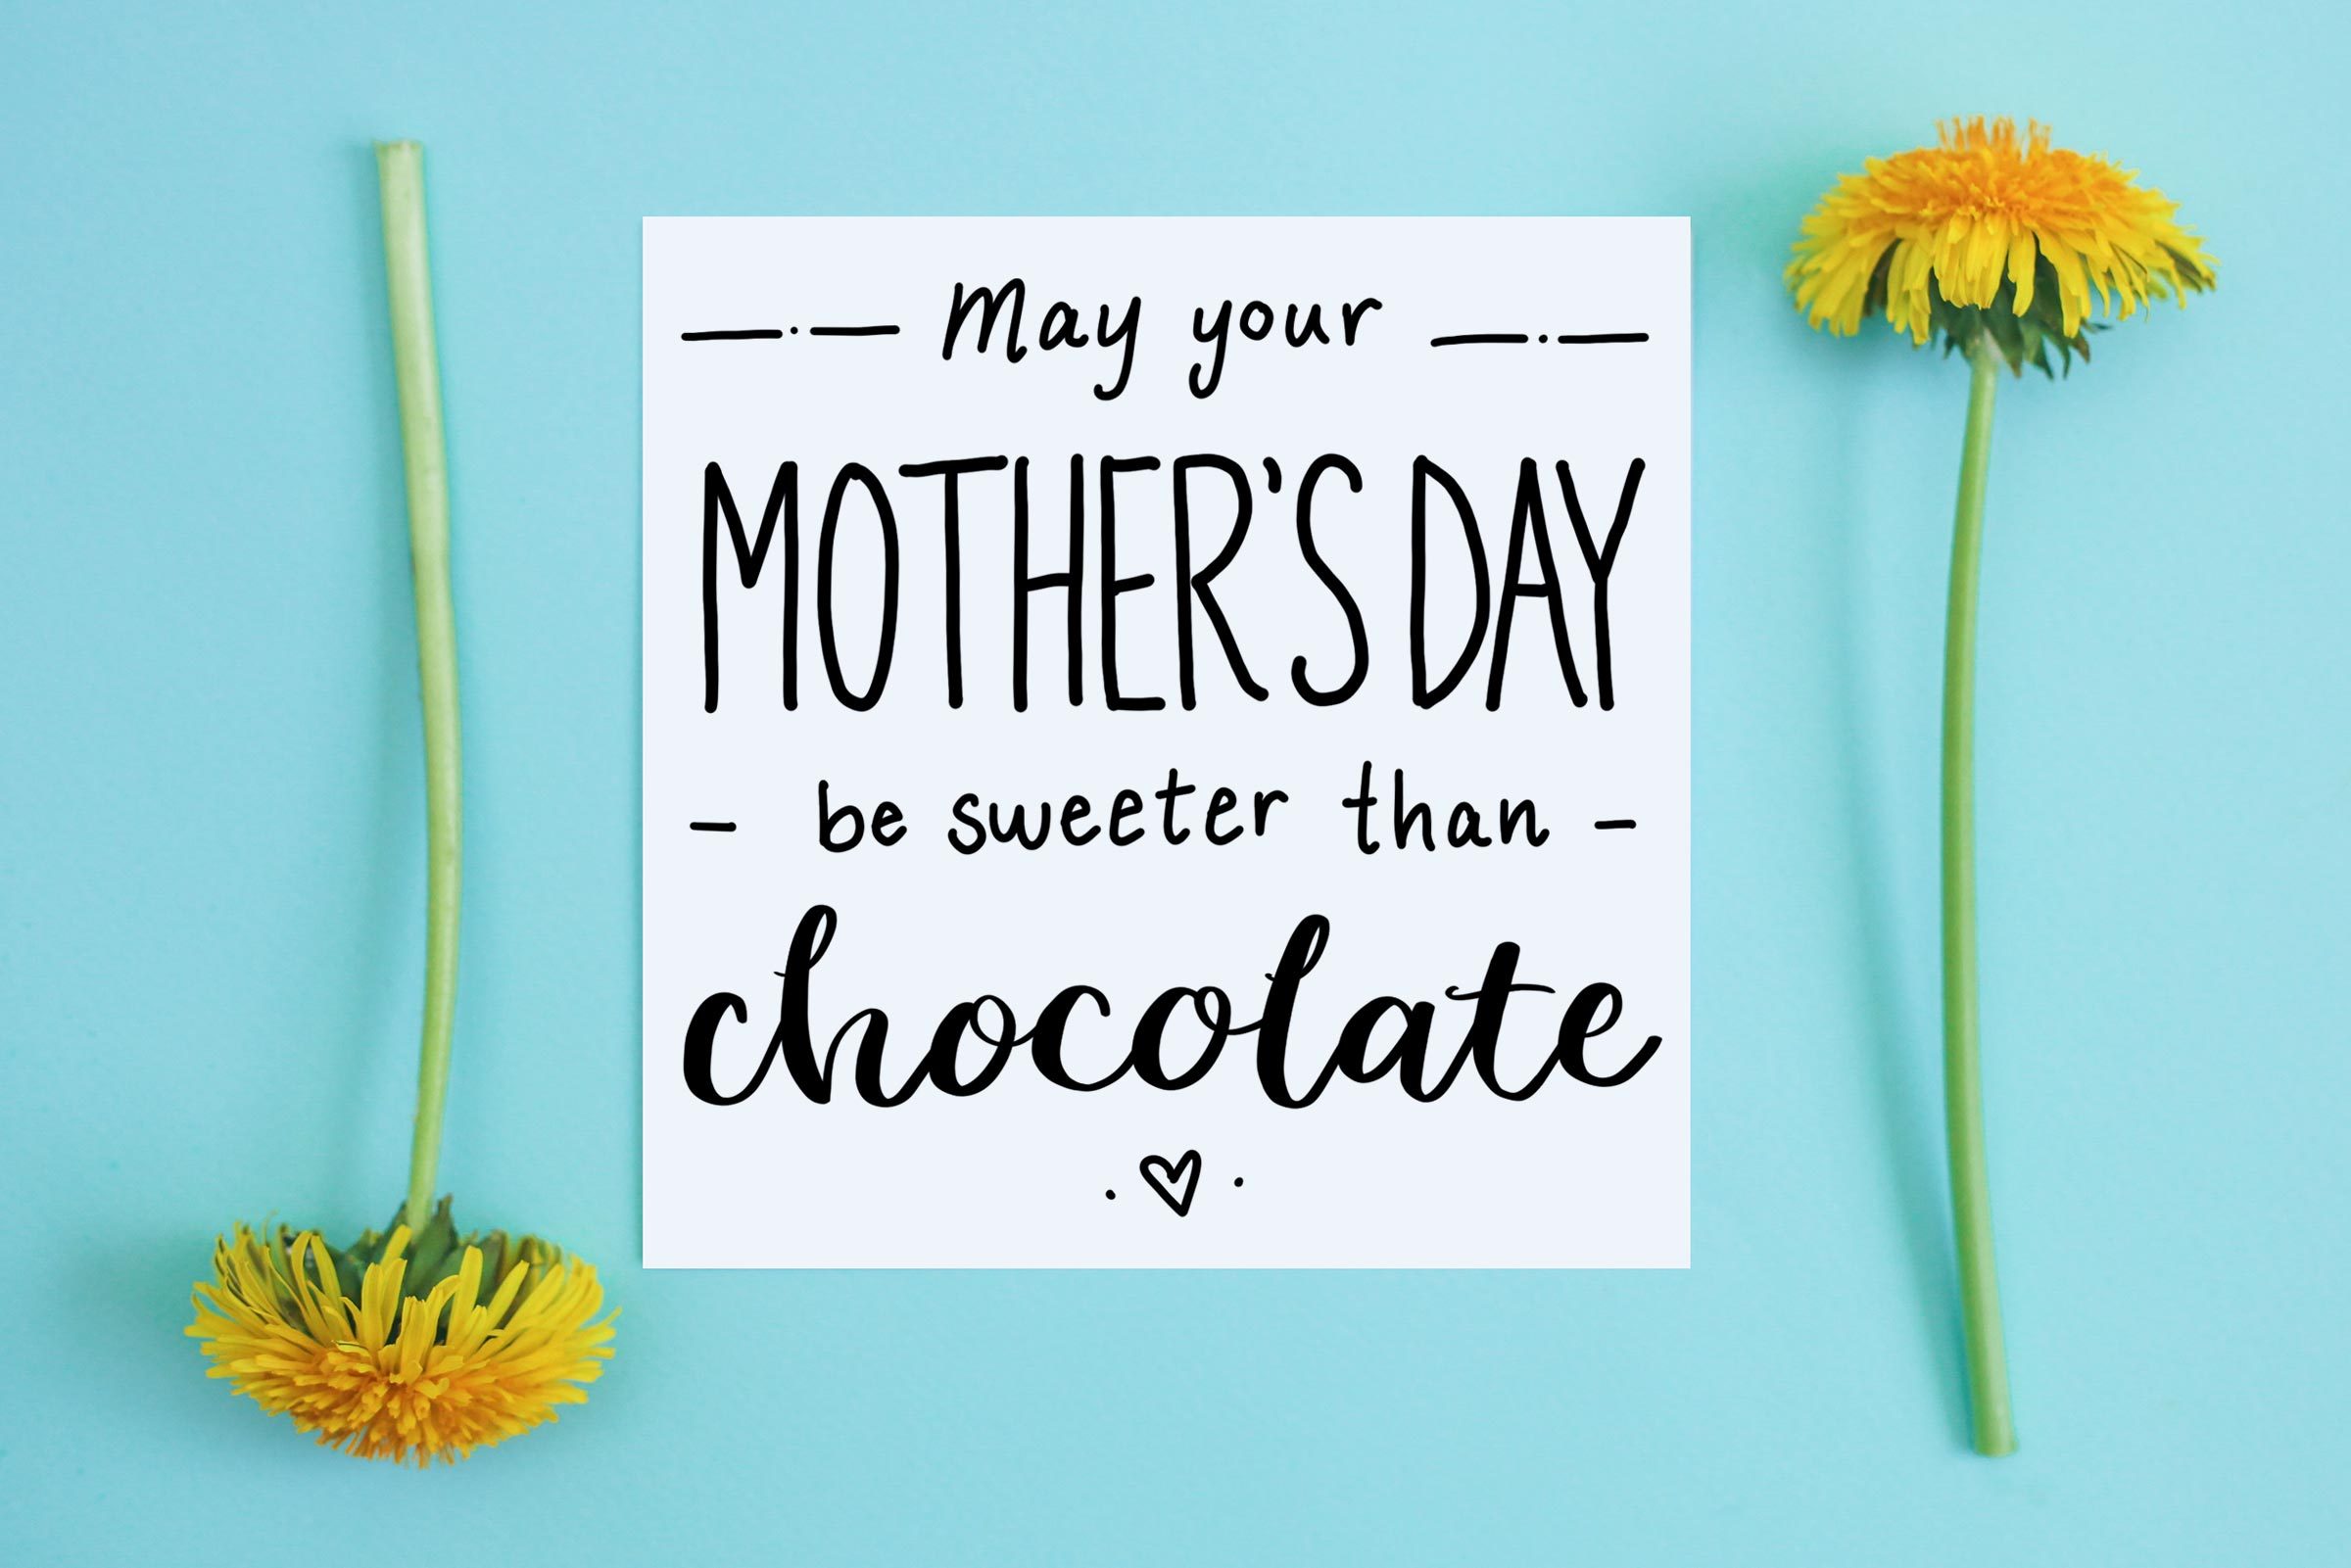 Mothers Day Message For Sister that reads "may your mother's day be sweeter than chocolate"